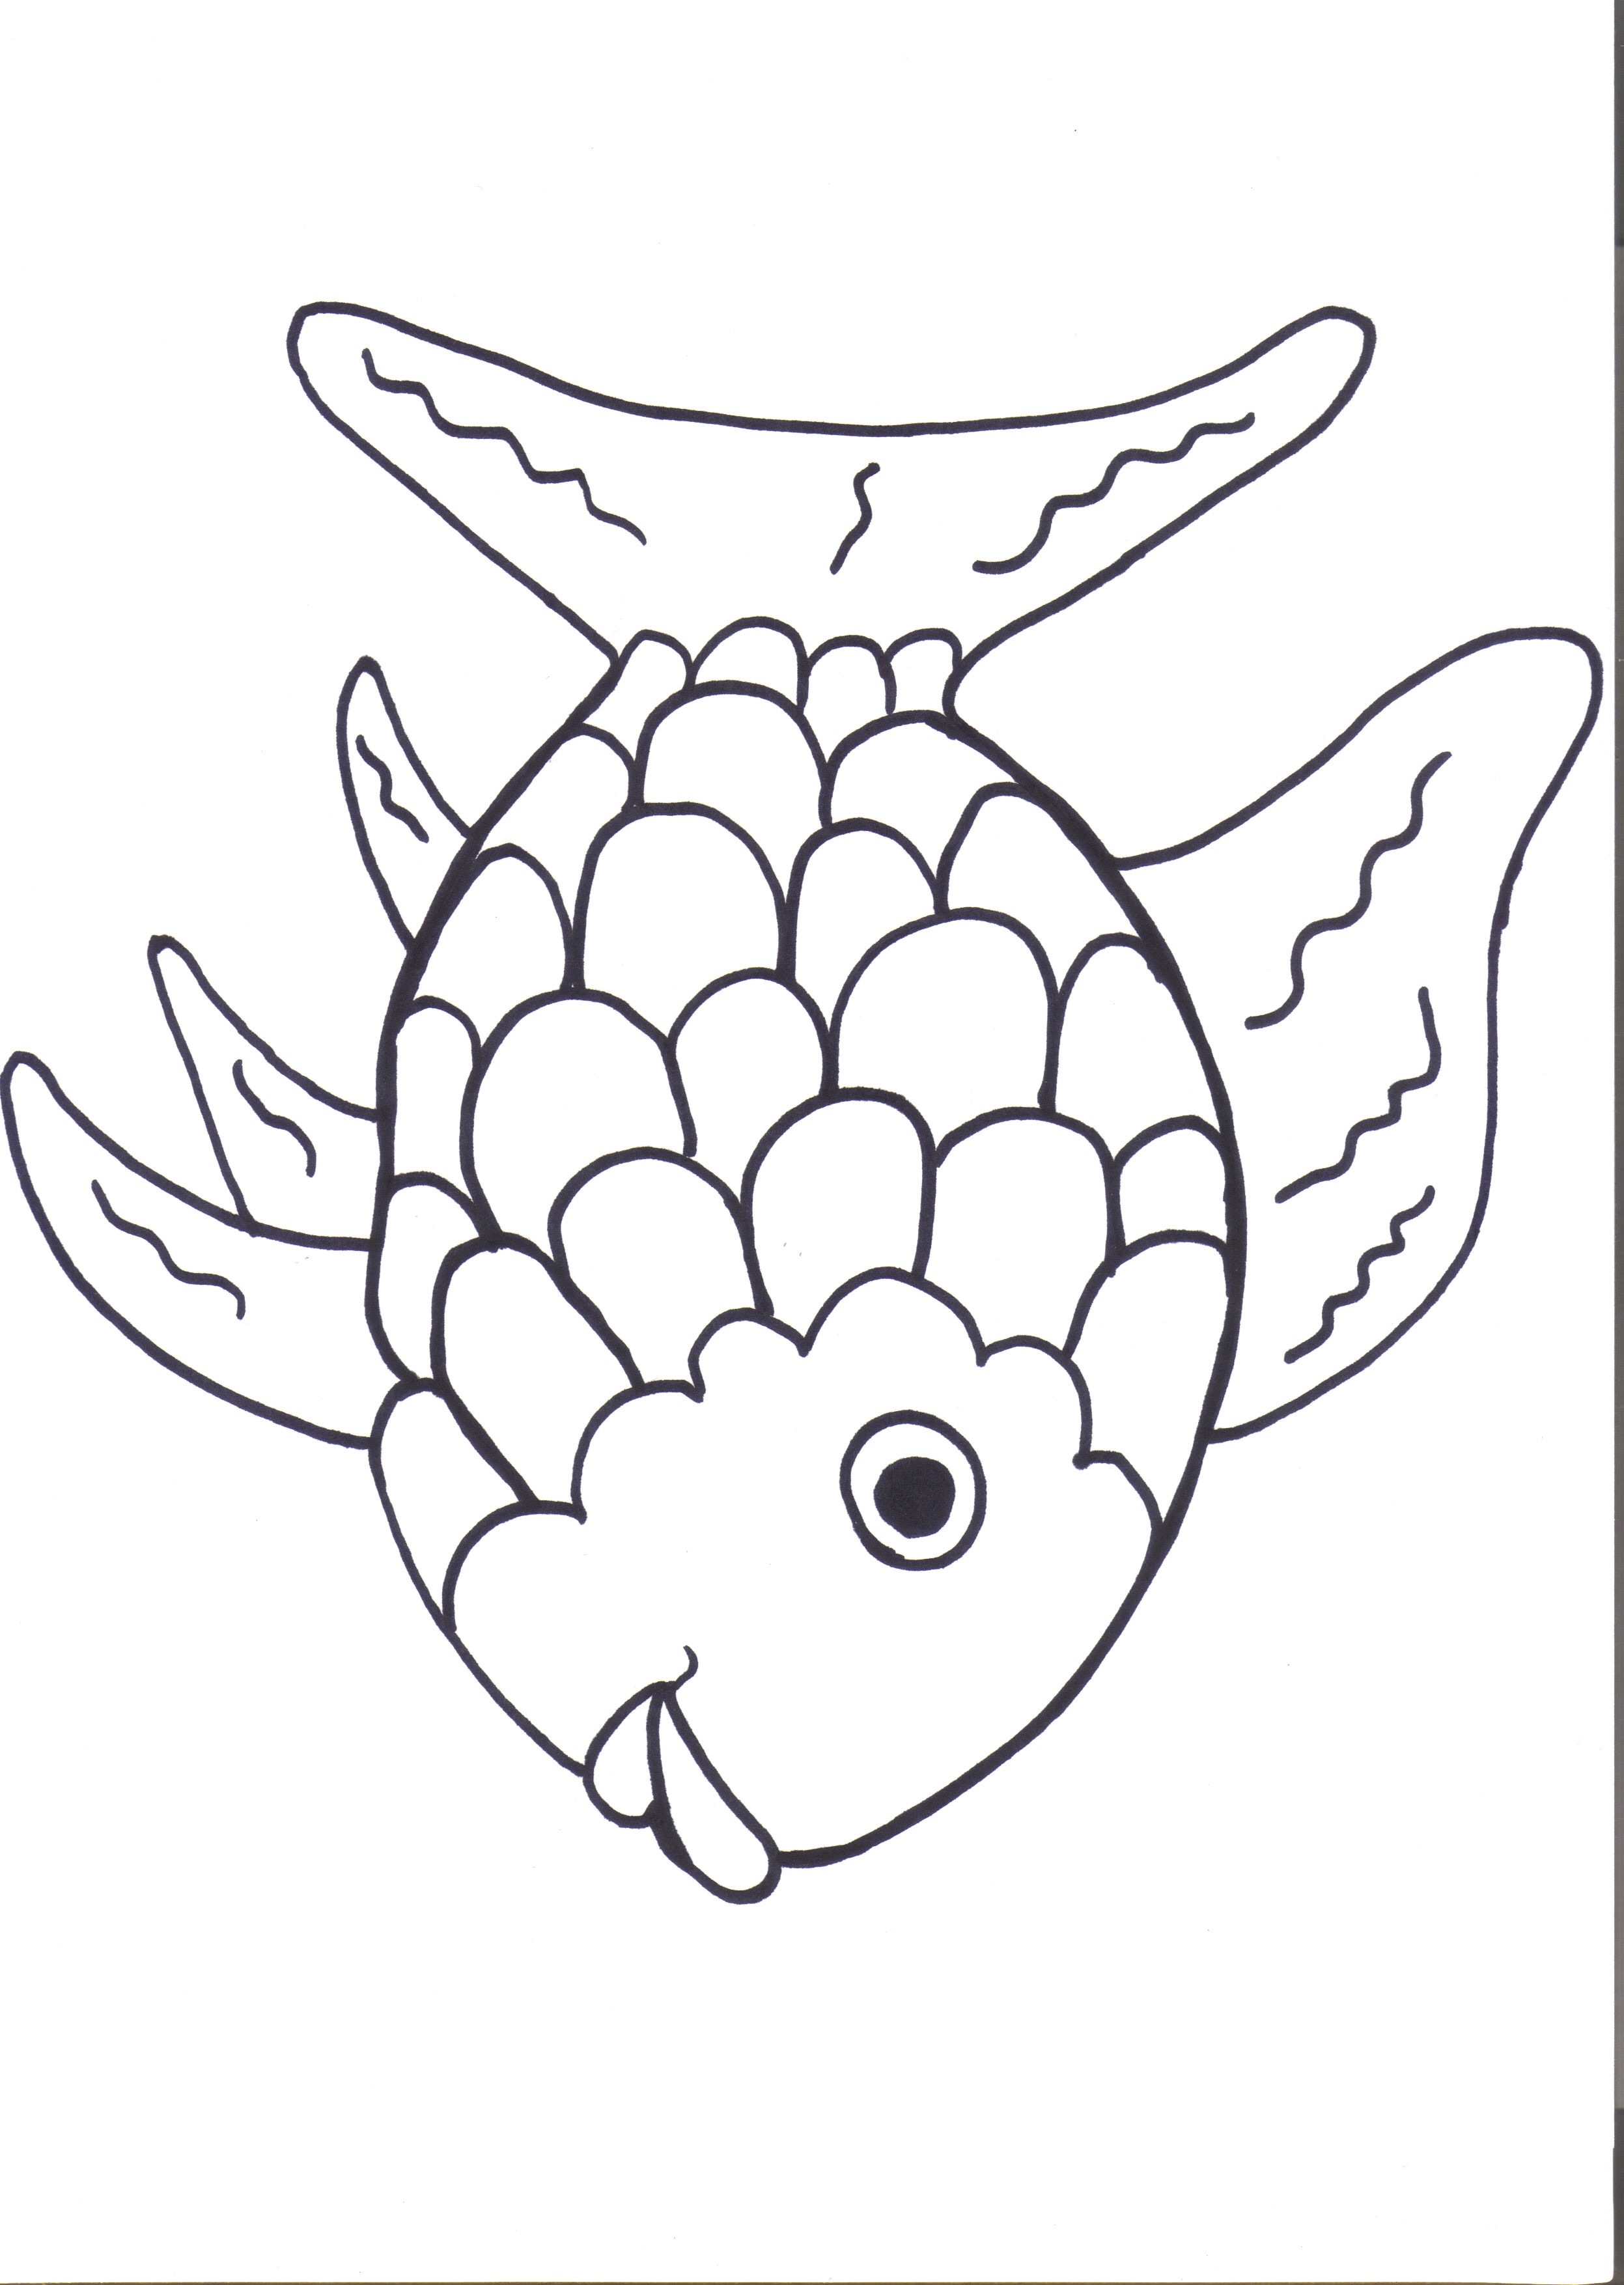 Free Rainbow Fish Outline Download Free Rainbow Fish Outline png